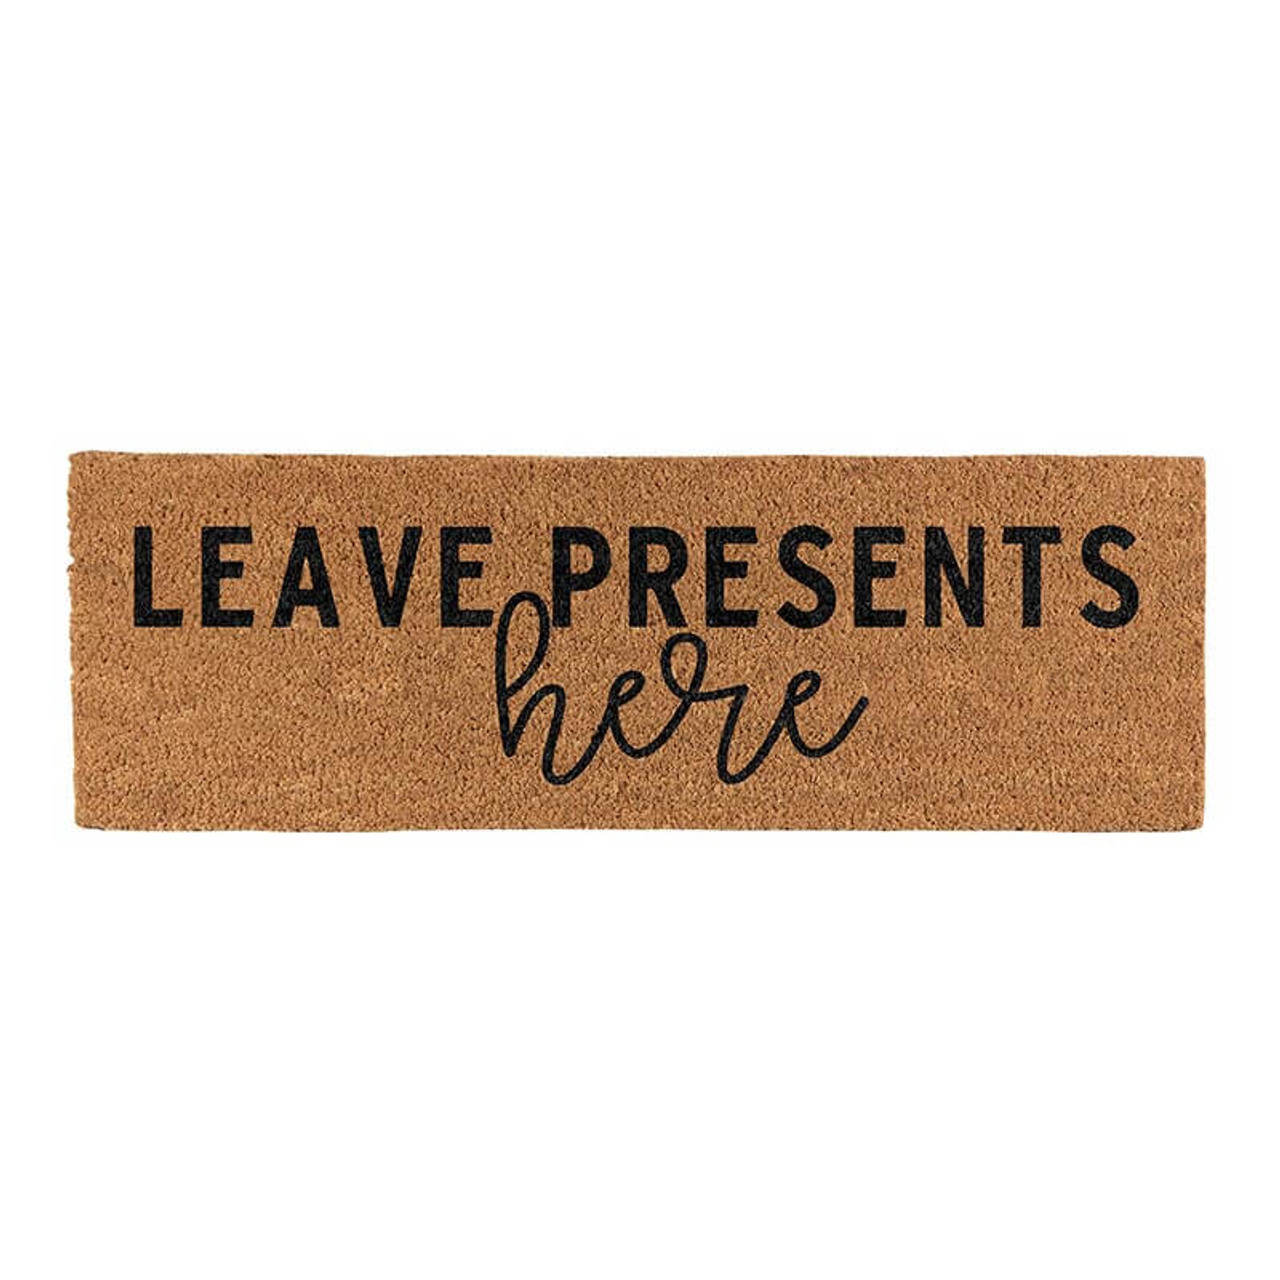 This coir door mat adds a personalized touch to your home with a "Leave presents here" sentiment